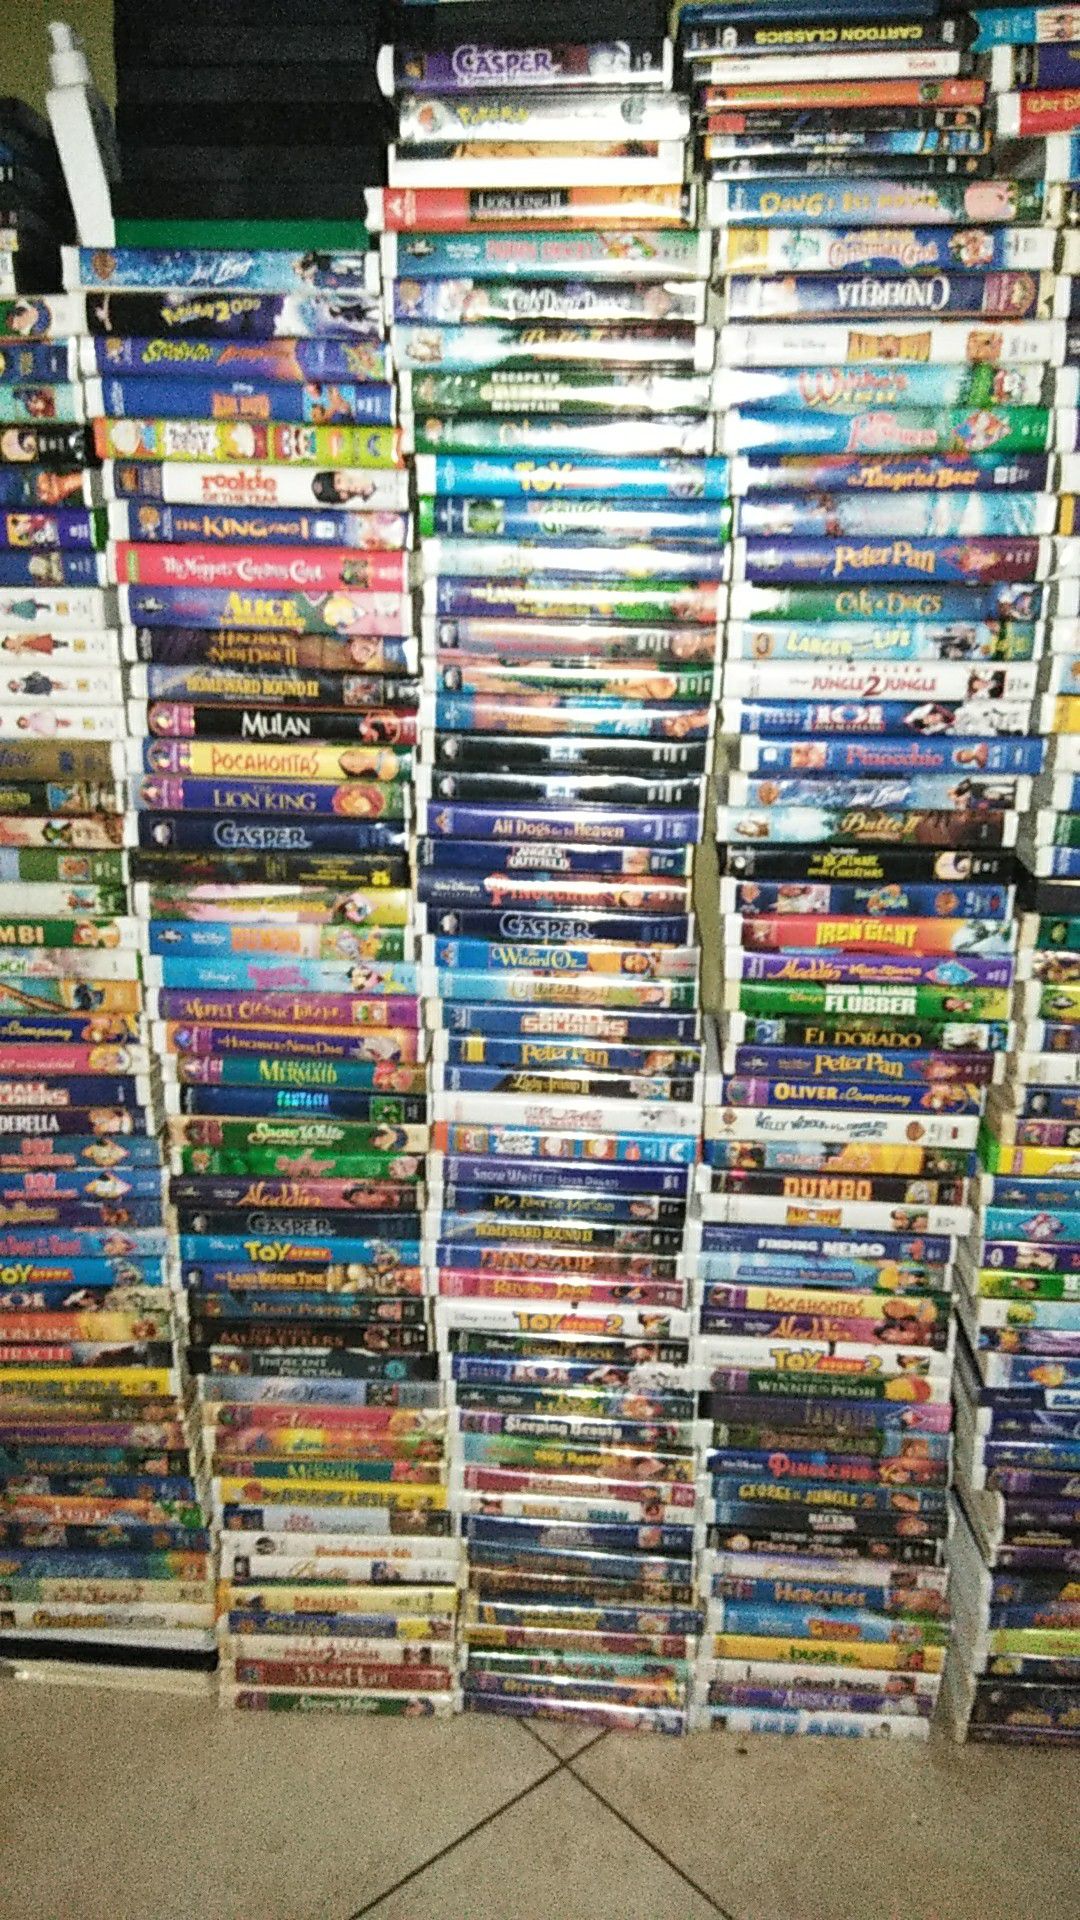 Extremely rare Masterpiece and black diamond edition VHS Walt Disney movies including others